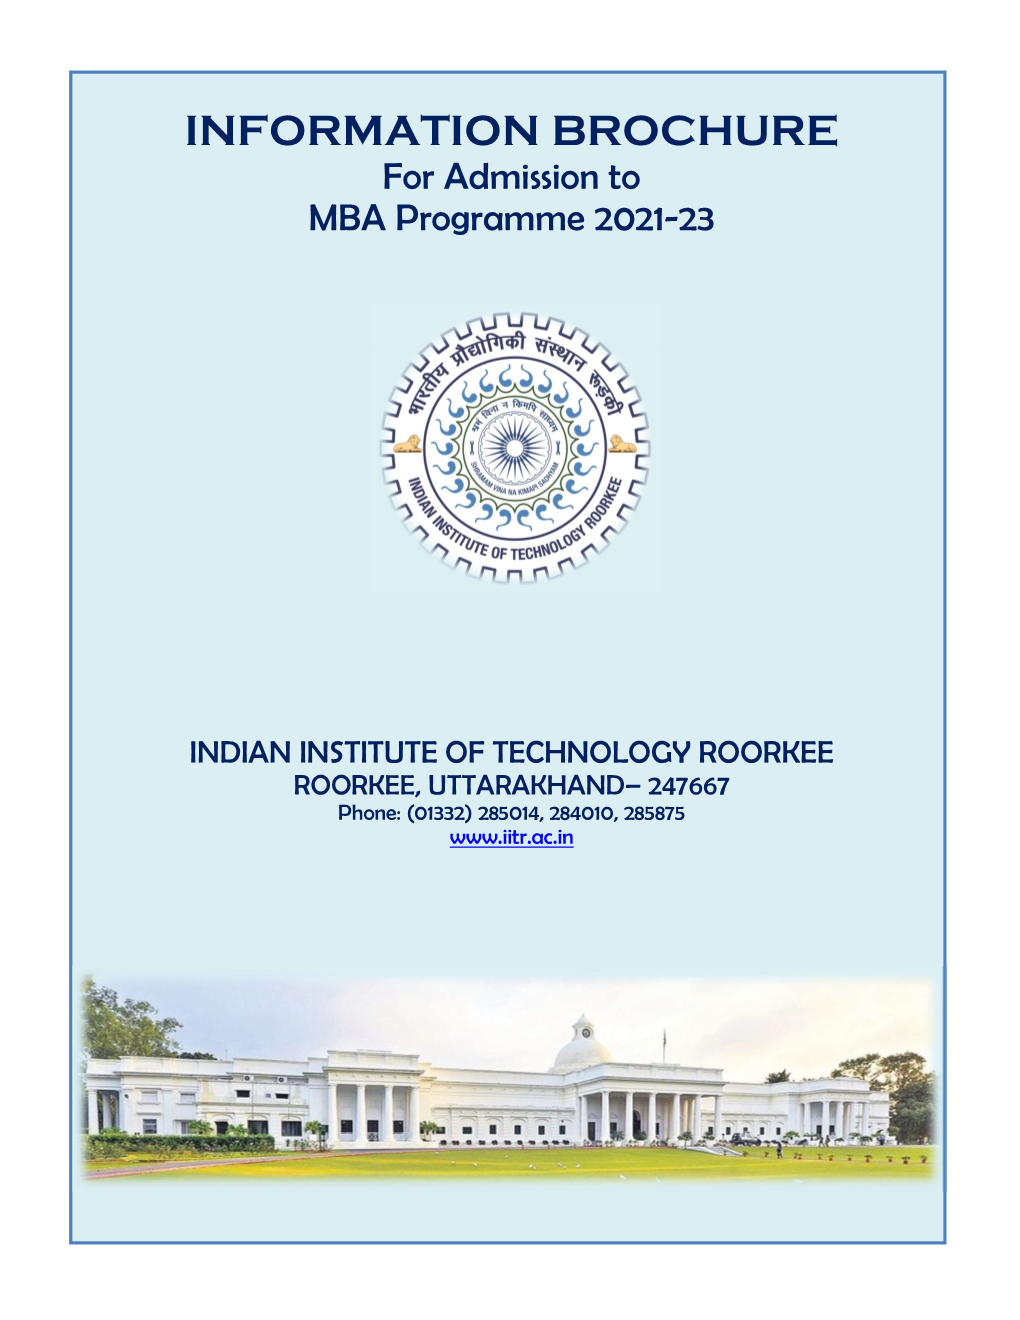 INFORMATION BROCHURE for Admission to MBA Programme 2021-23